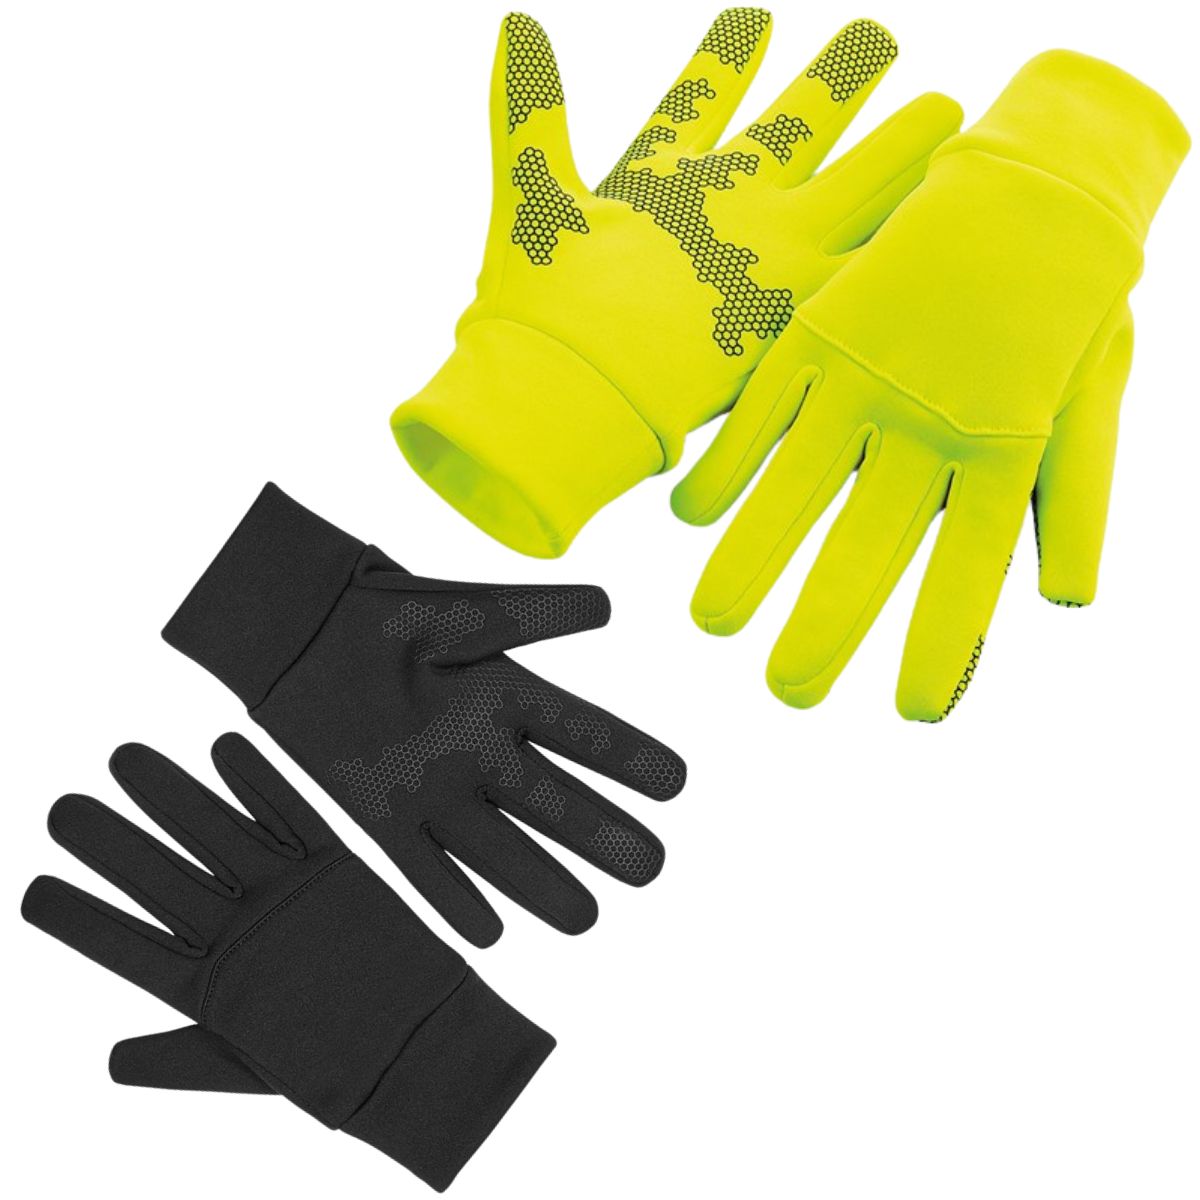 Cycle Gloves, two pairs, in yellow and black